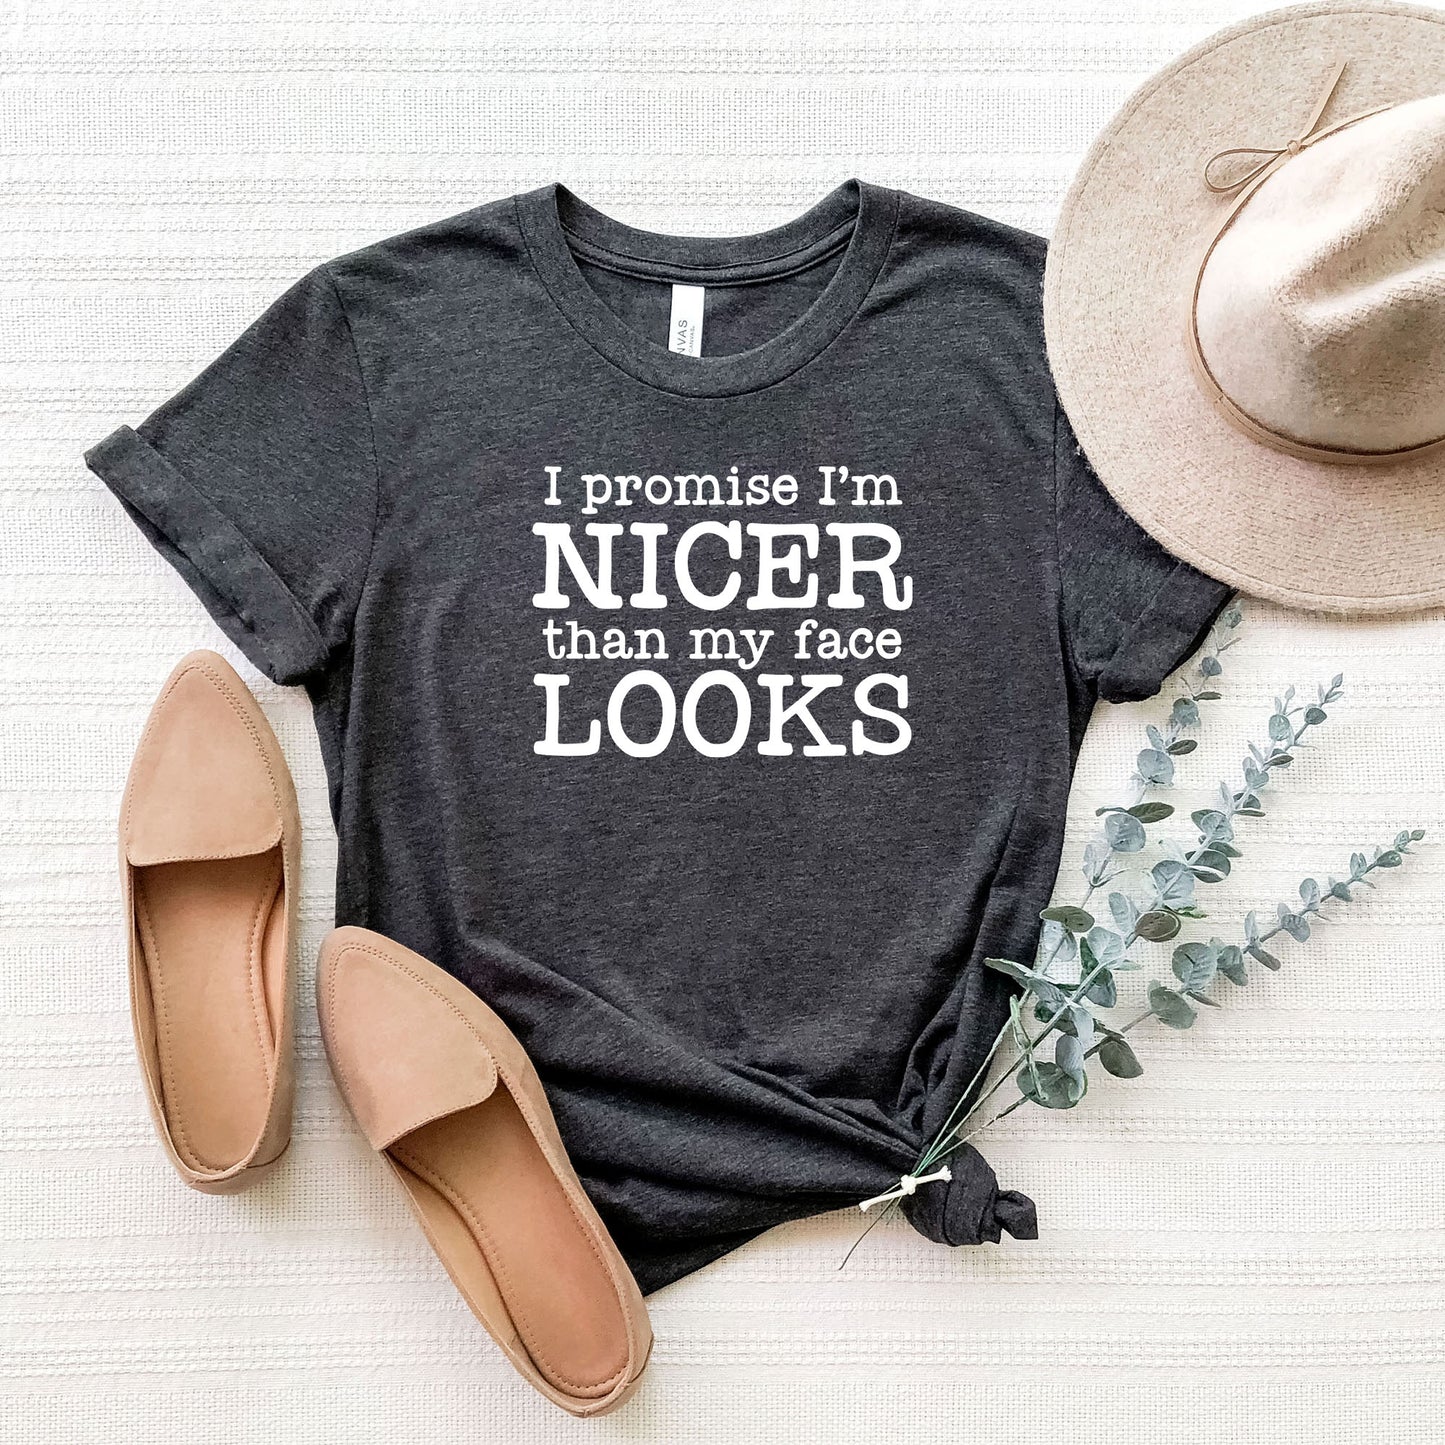 I'm Nicer Than My Face Looks | Short Sleeve Graphic Tee